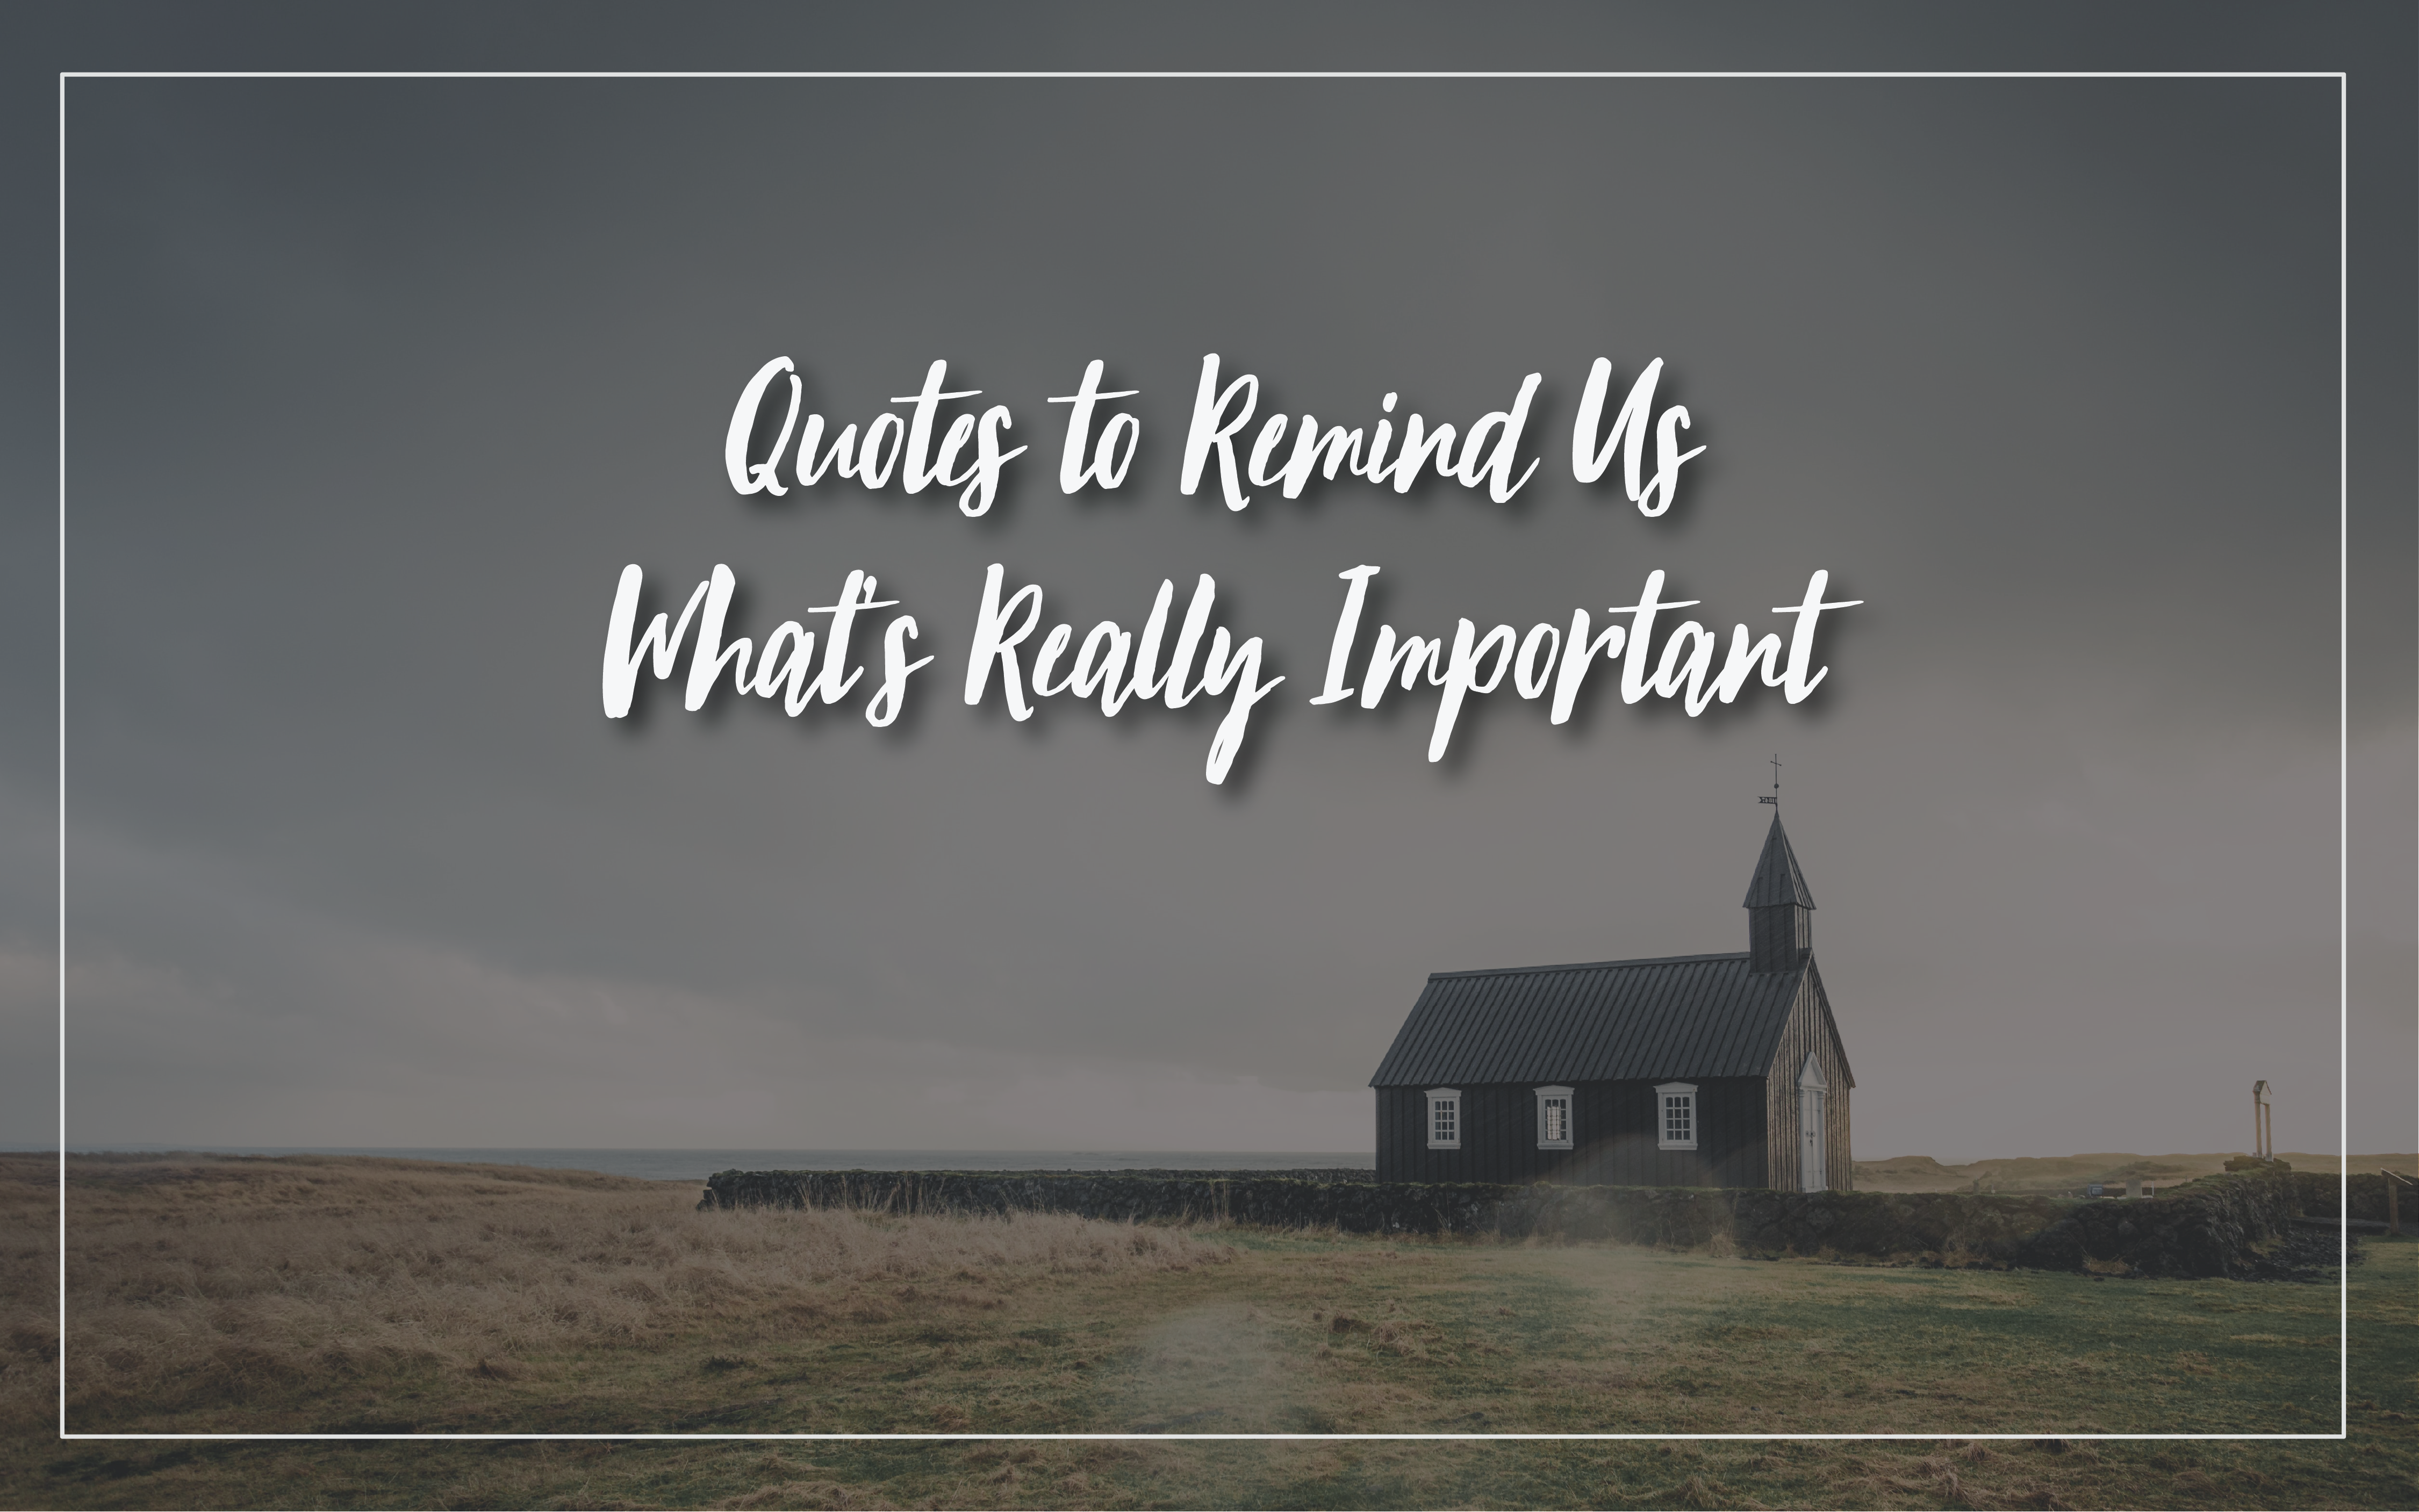 19 Quotes to Remind Us What’s Really Important